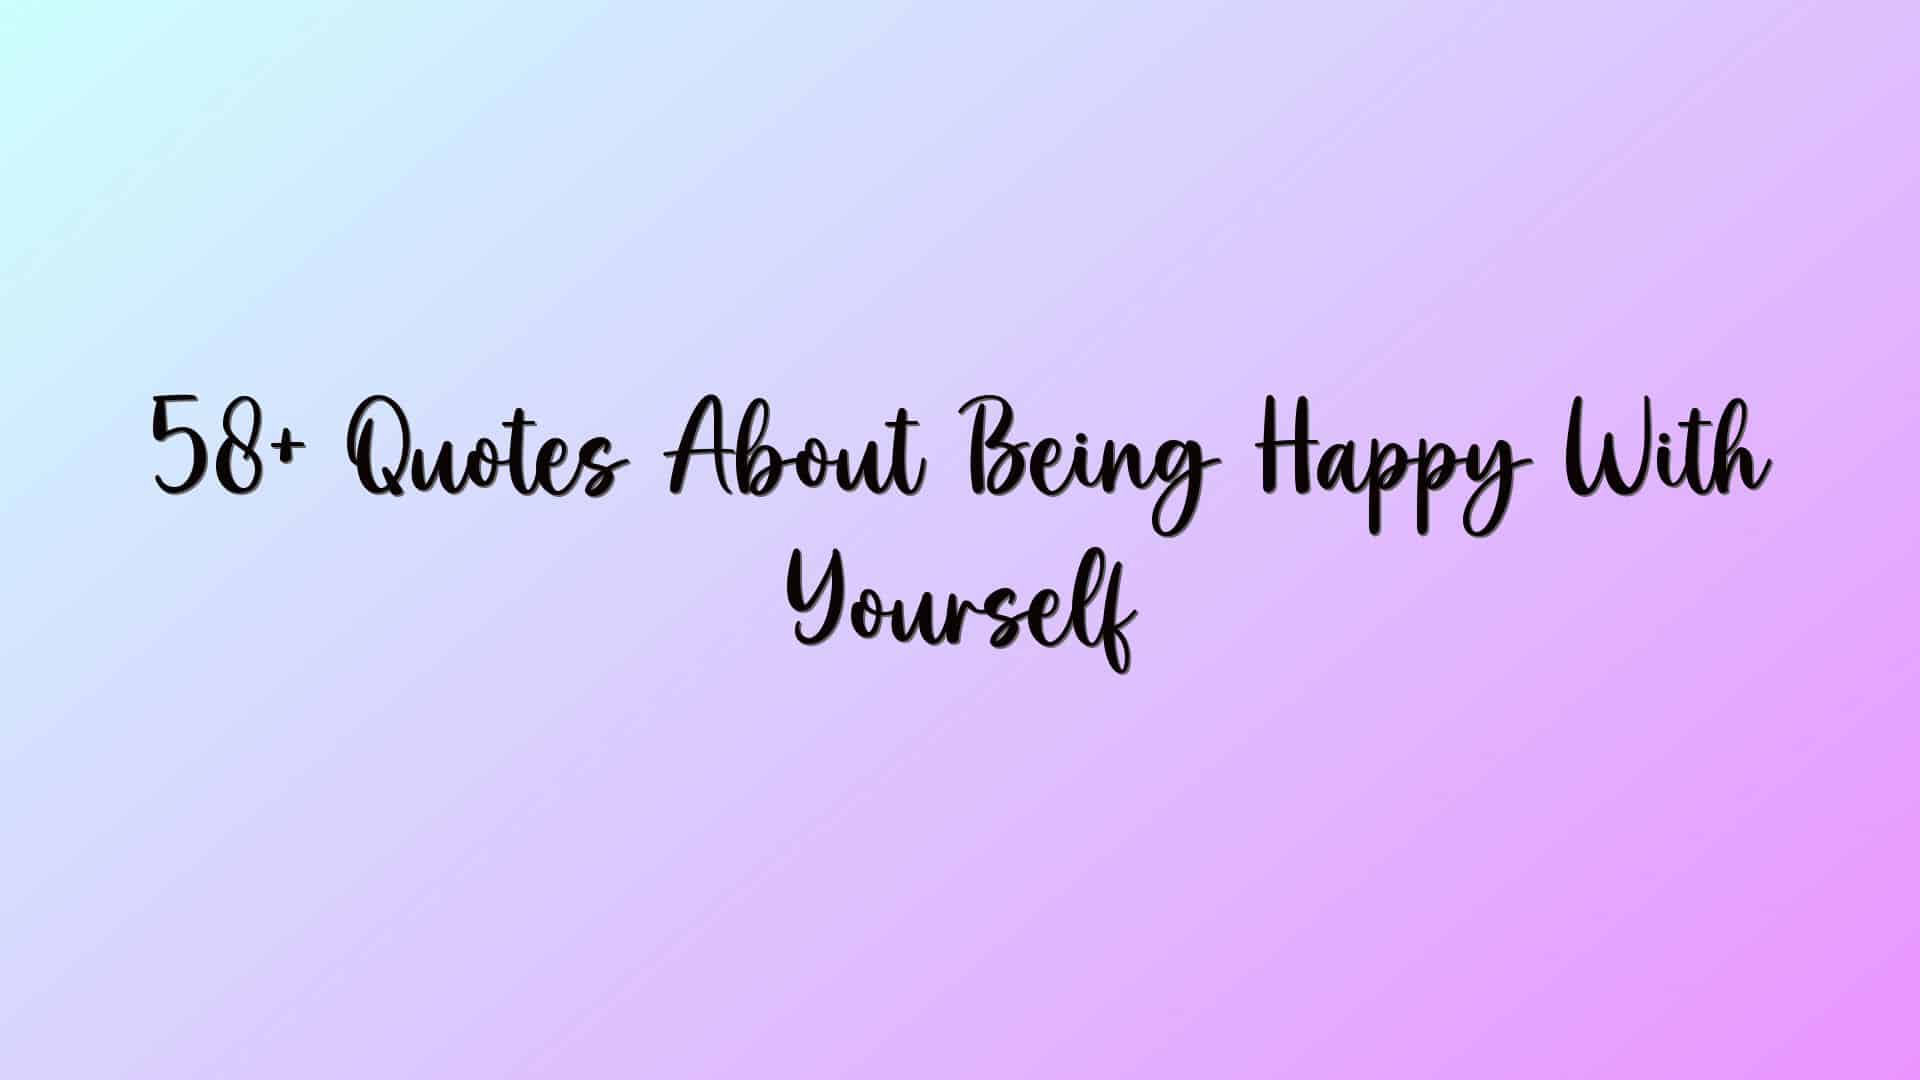 58+ Quotes About Being Happy With Yourself